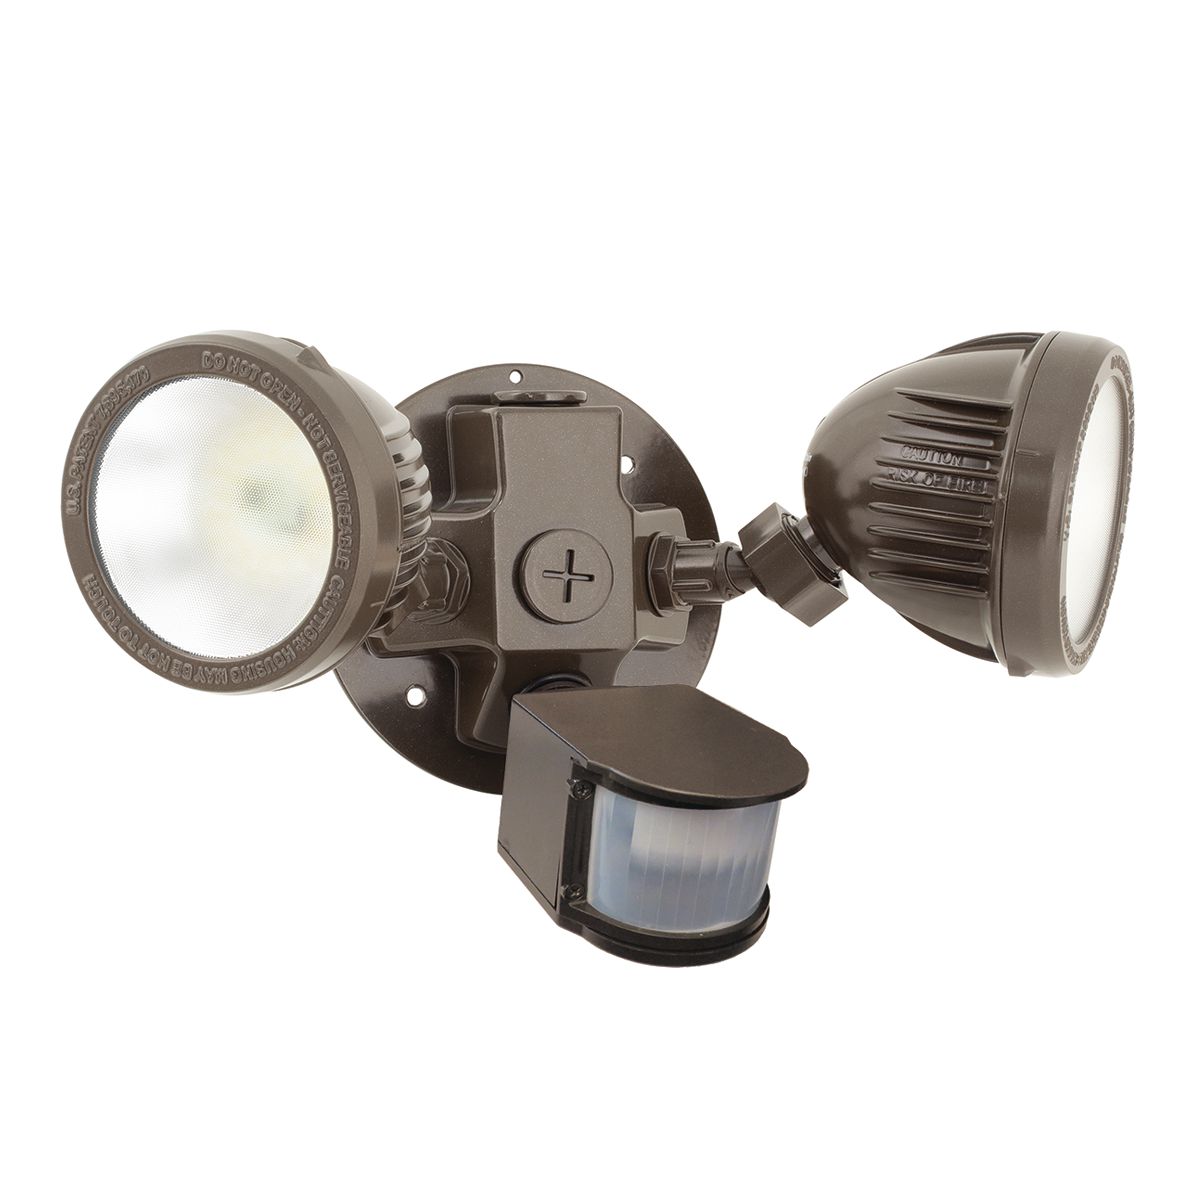 Security floodlight, color: White